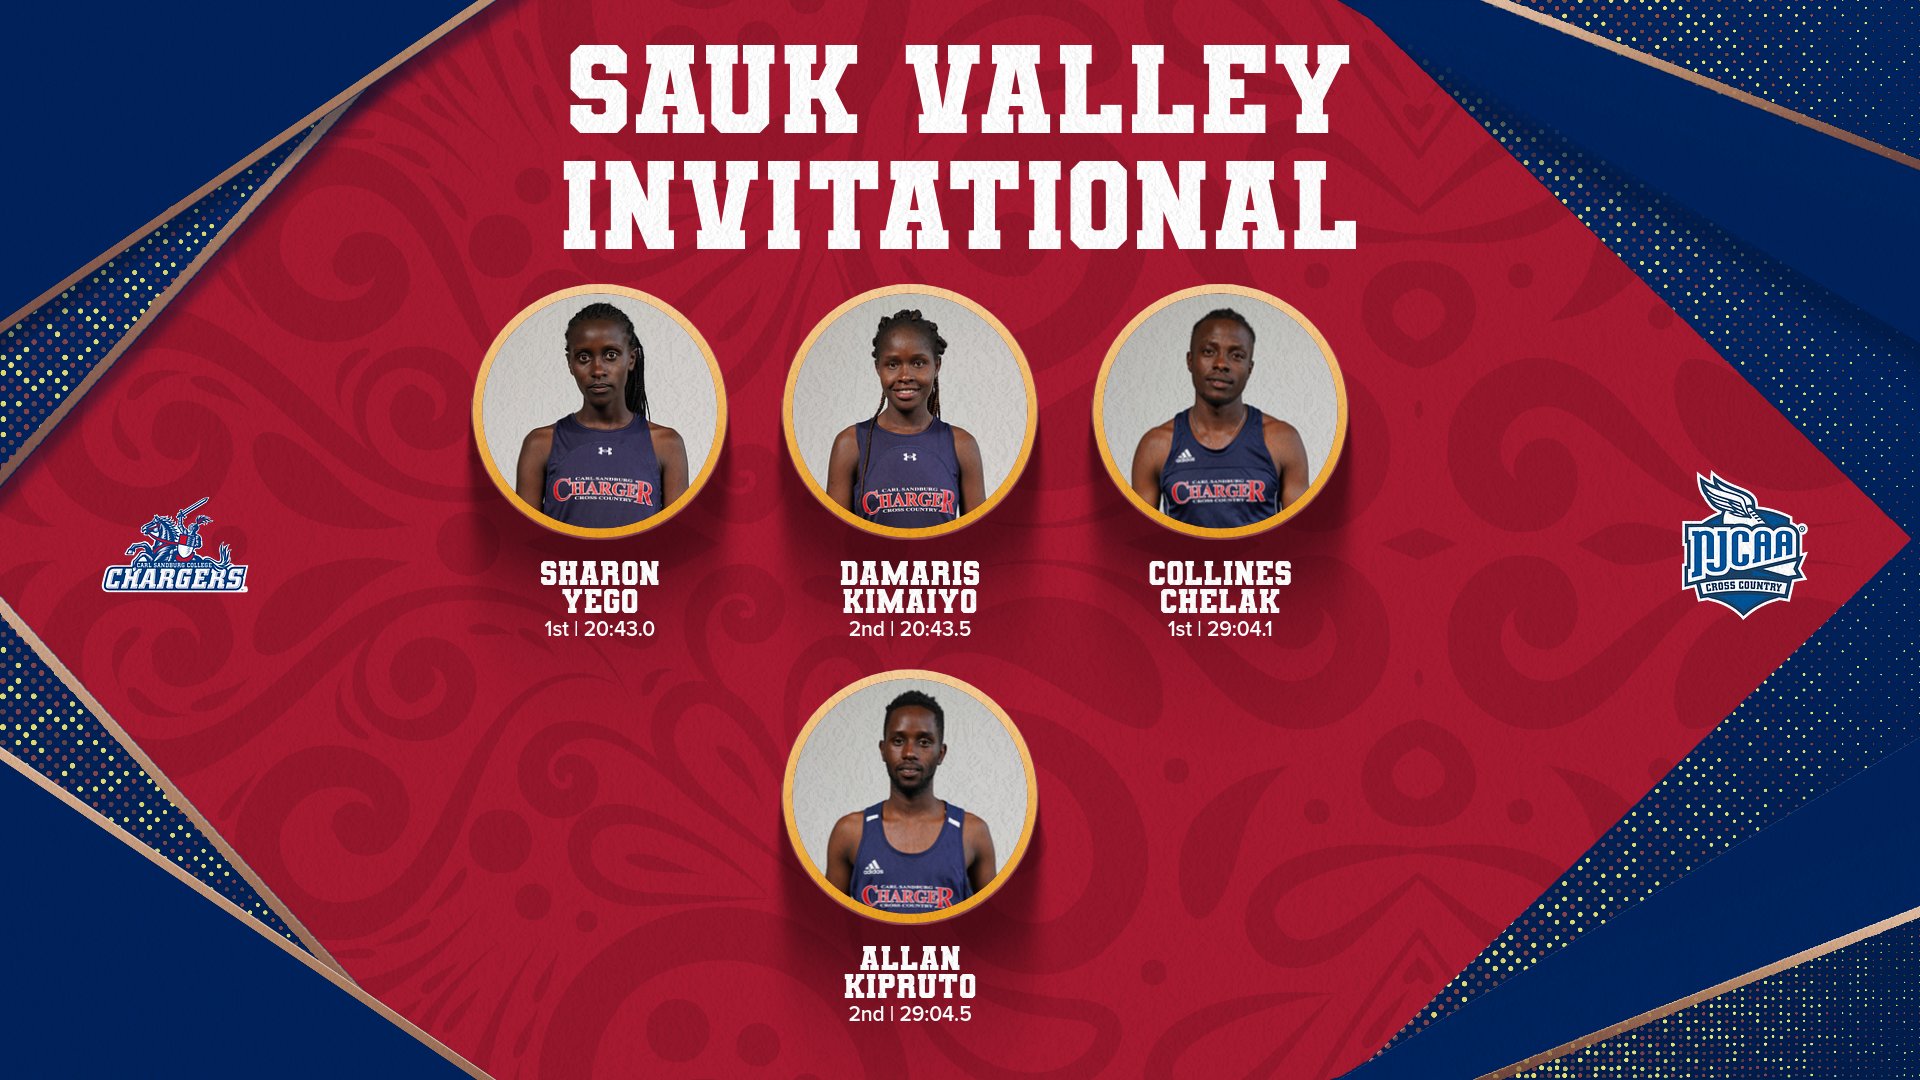 Chargers Take Top 2 Spots in Both Races at Sauk Valley Invitational